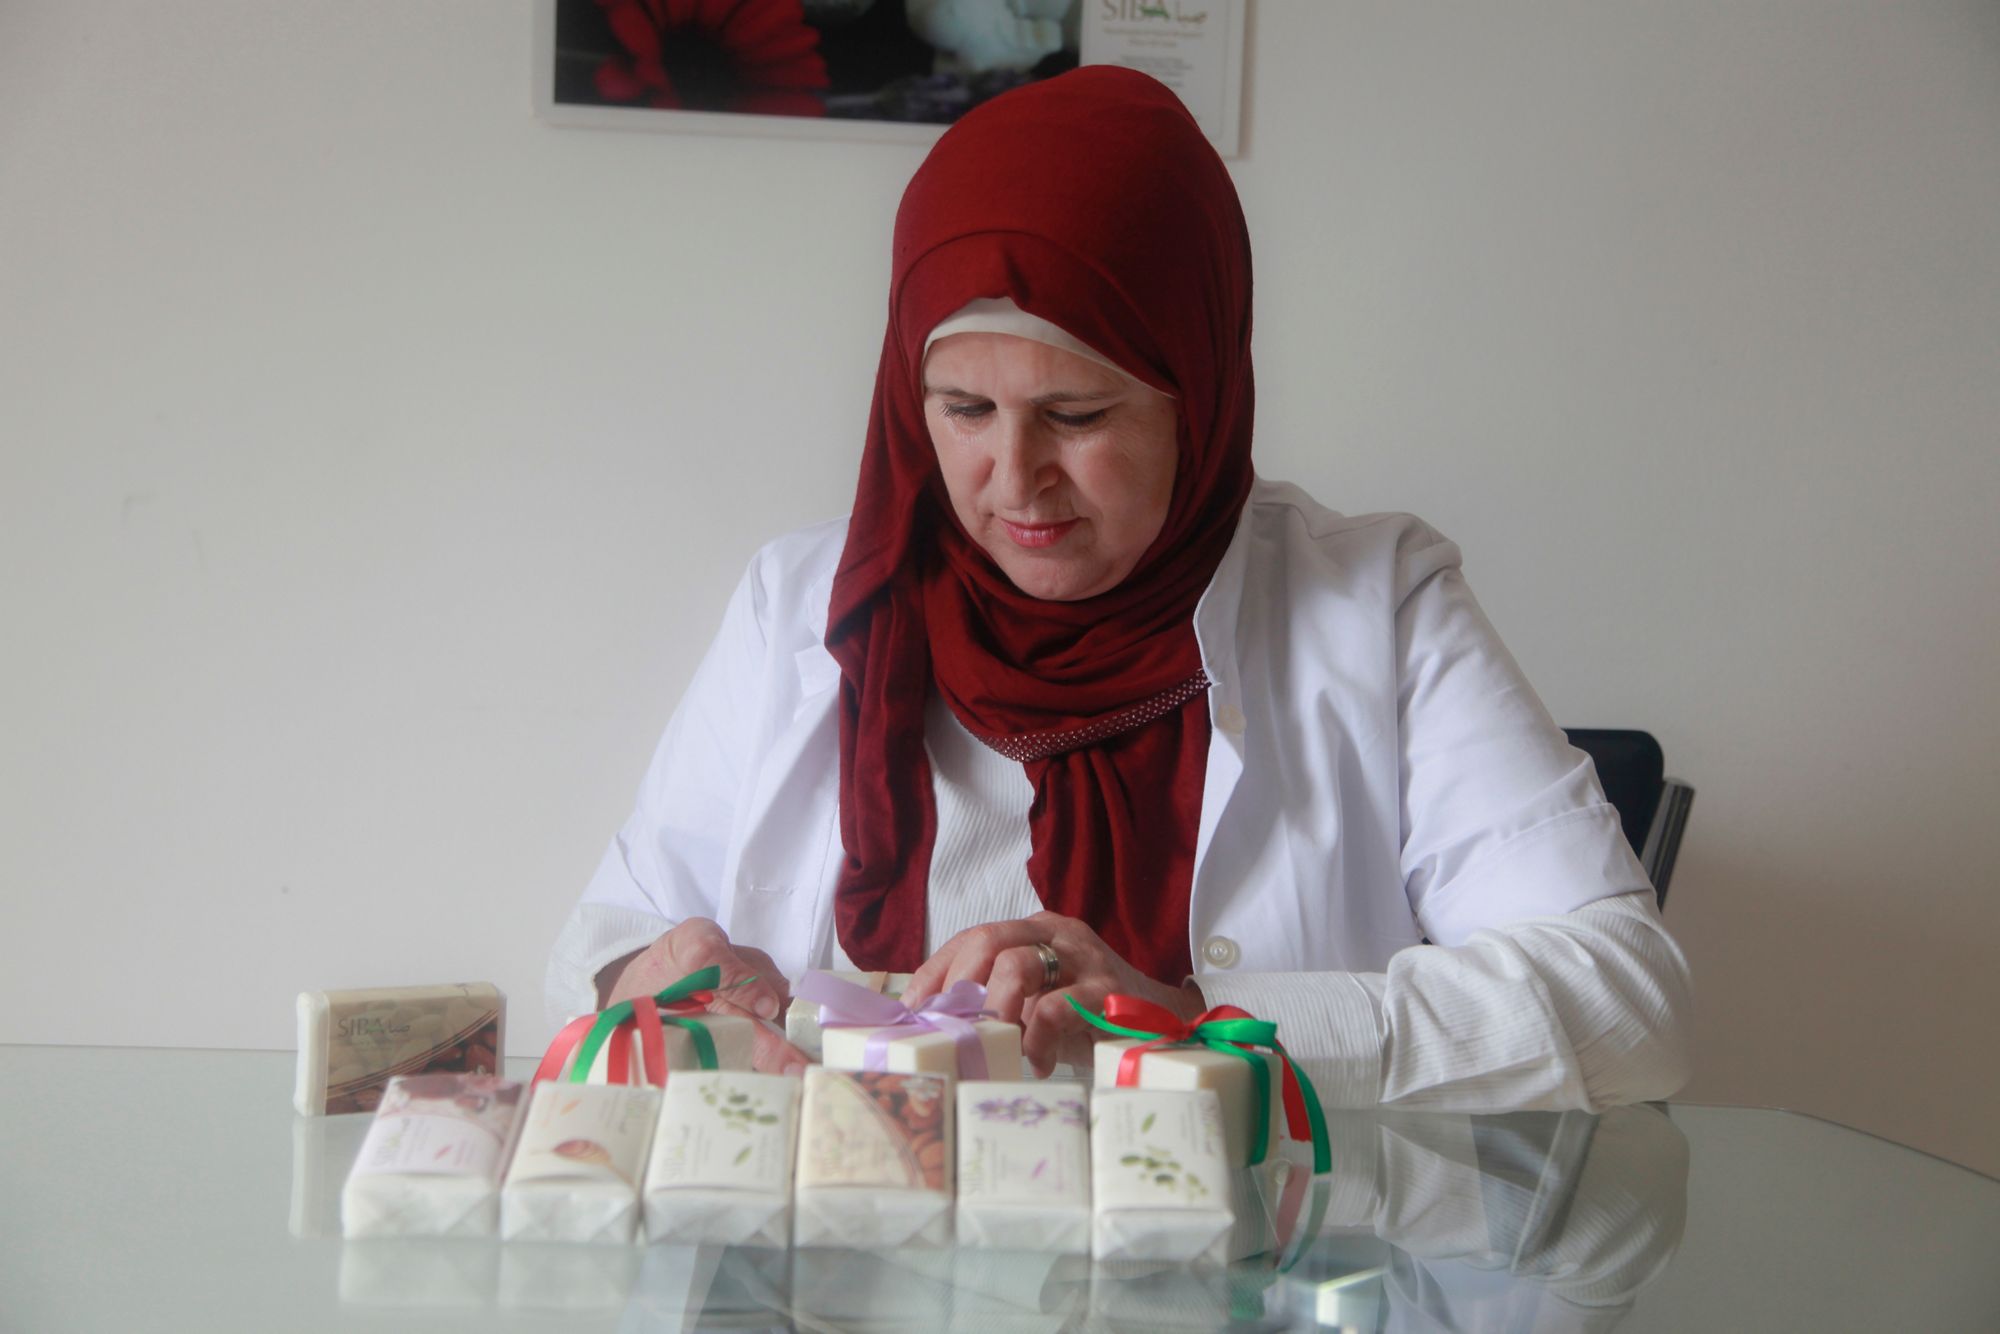 Story: Bank of Palestine
Image Subject: BOP Women Entrepreneurs mini MBA program
Region: MENA

Credit: Arine Rinawi
Contributor: Mohammed Essa

Ikhlas Sawalha – “My name is Ikhlas Sawalha, 53 years old, I have been started to produce soaps from my home 13 years ago and I am building a new soap factory  in Palestine with 13 employees and 216,000 Shekel in sales. The loan from bank of Palestine ($400k) has helped me to make my dreams come true and allowed me to build a new factory and helped me grow my business from a small operation out of the kitchen in my home to the third largest soap manufacturer in Palestine. The Mini-MBA training that BOP has provided to me supported me in becoming a more skilled entrepreneur, assessing business opportunities in a much more systematic way and also think in a more innovative way on how to market and brand my products. Additionally, it has brought me closer to the bank”.